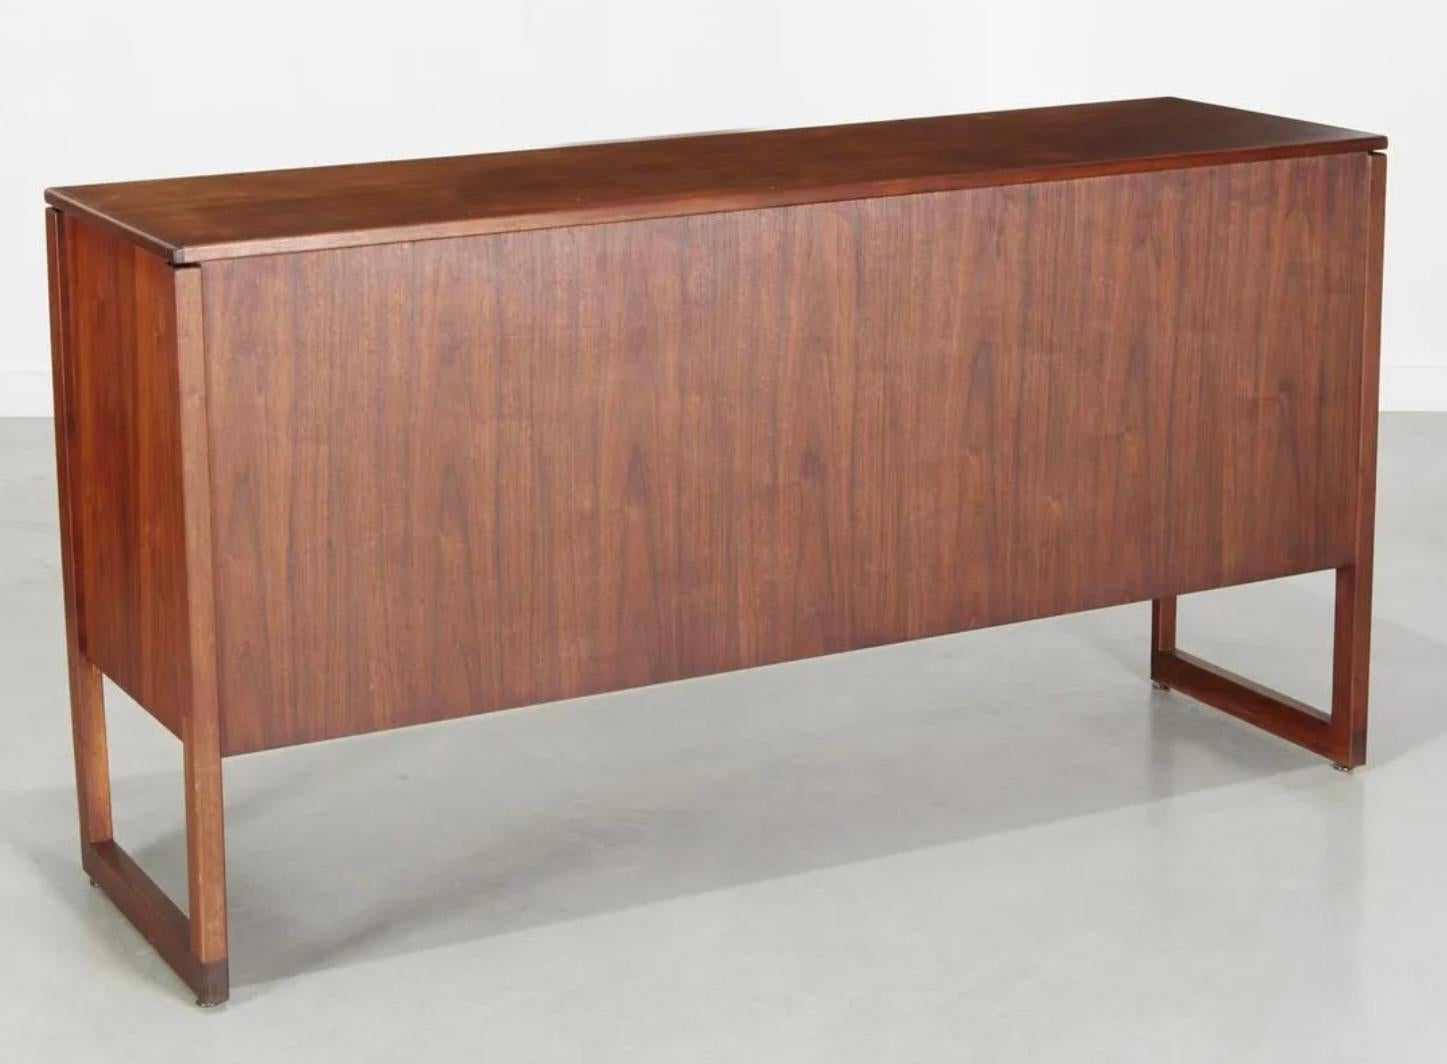 Beautiful American studio craft Mid-Century Modern long black walnut 8-drawer dresser credenza with all solid Brass curved pull handles. High end Construction with Metal Drawer slides. Great design good vintage condition with stunning walnut grain.